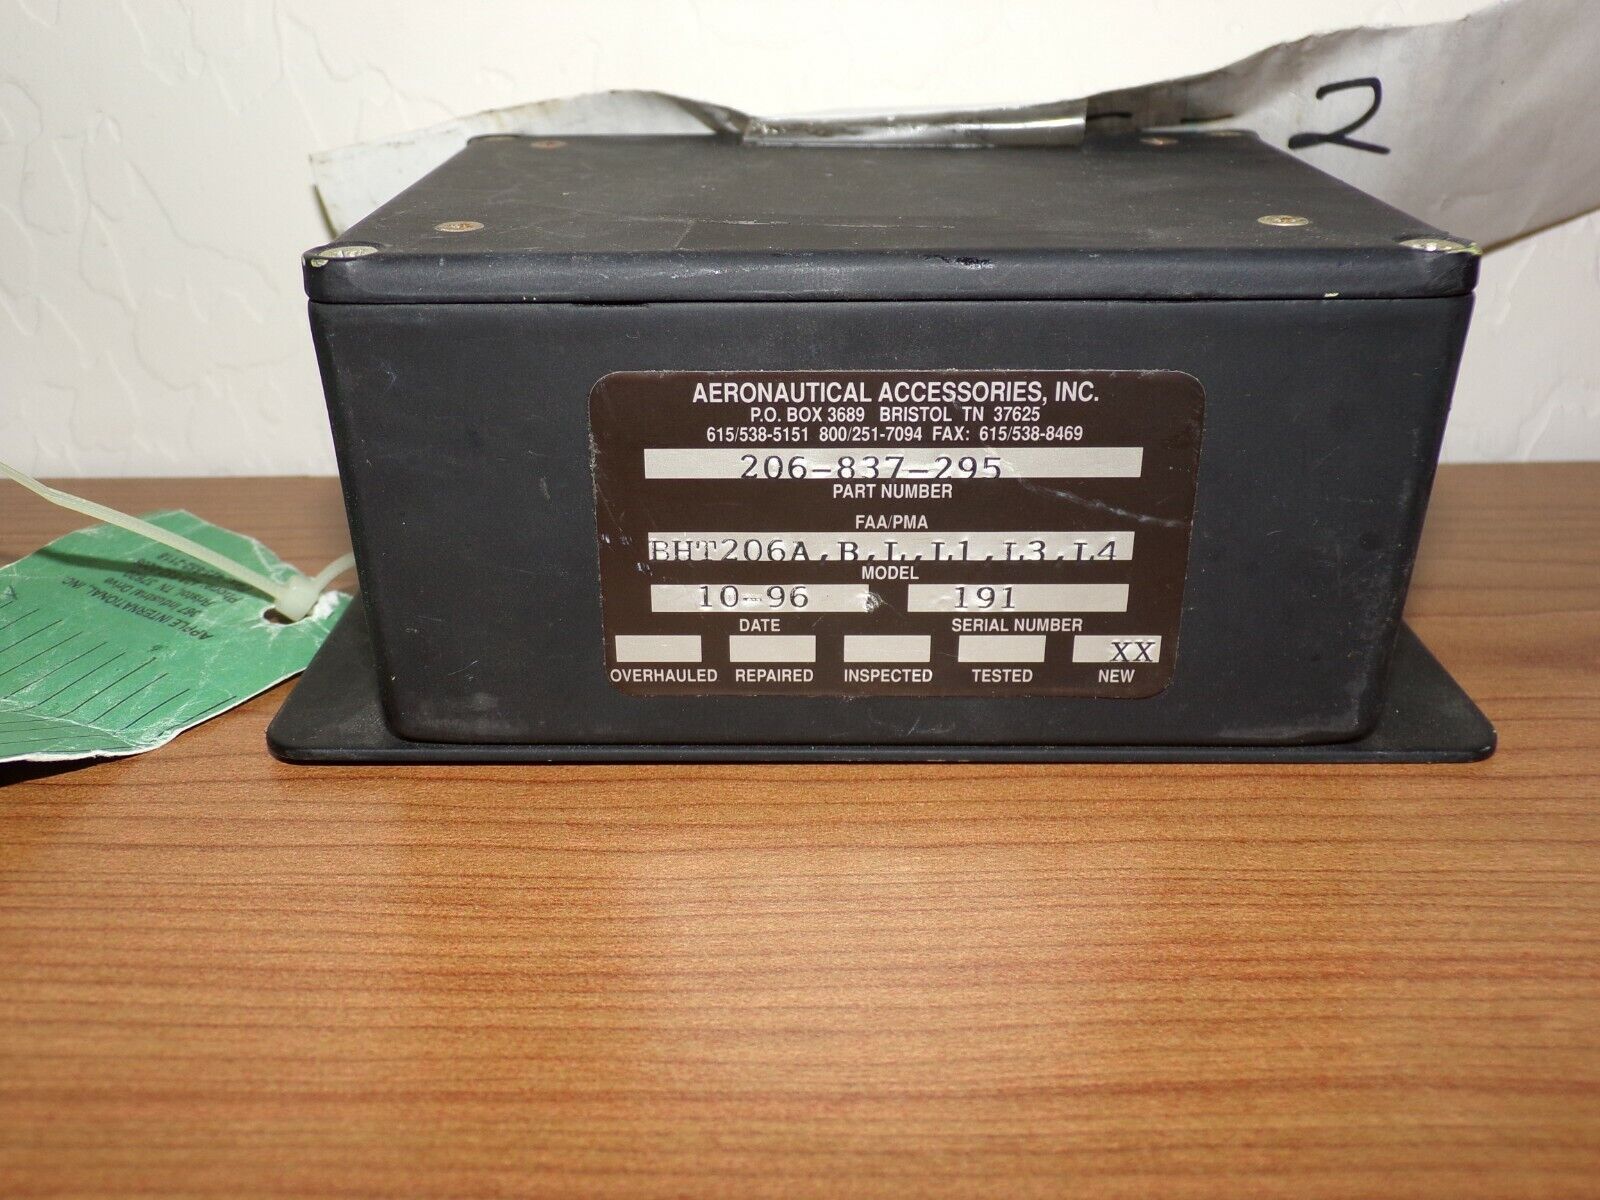 Bell 206 Helicopter Stow Control Box 206-837-295